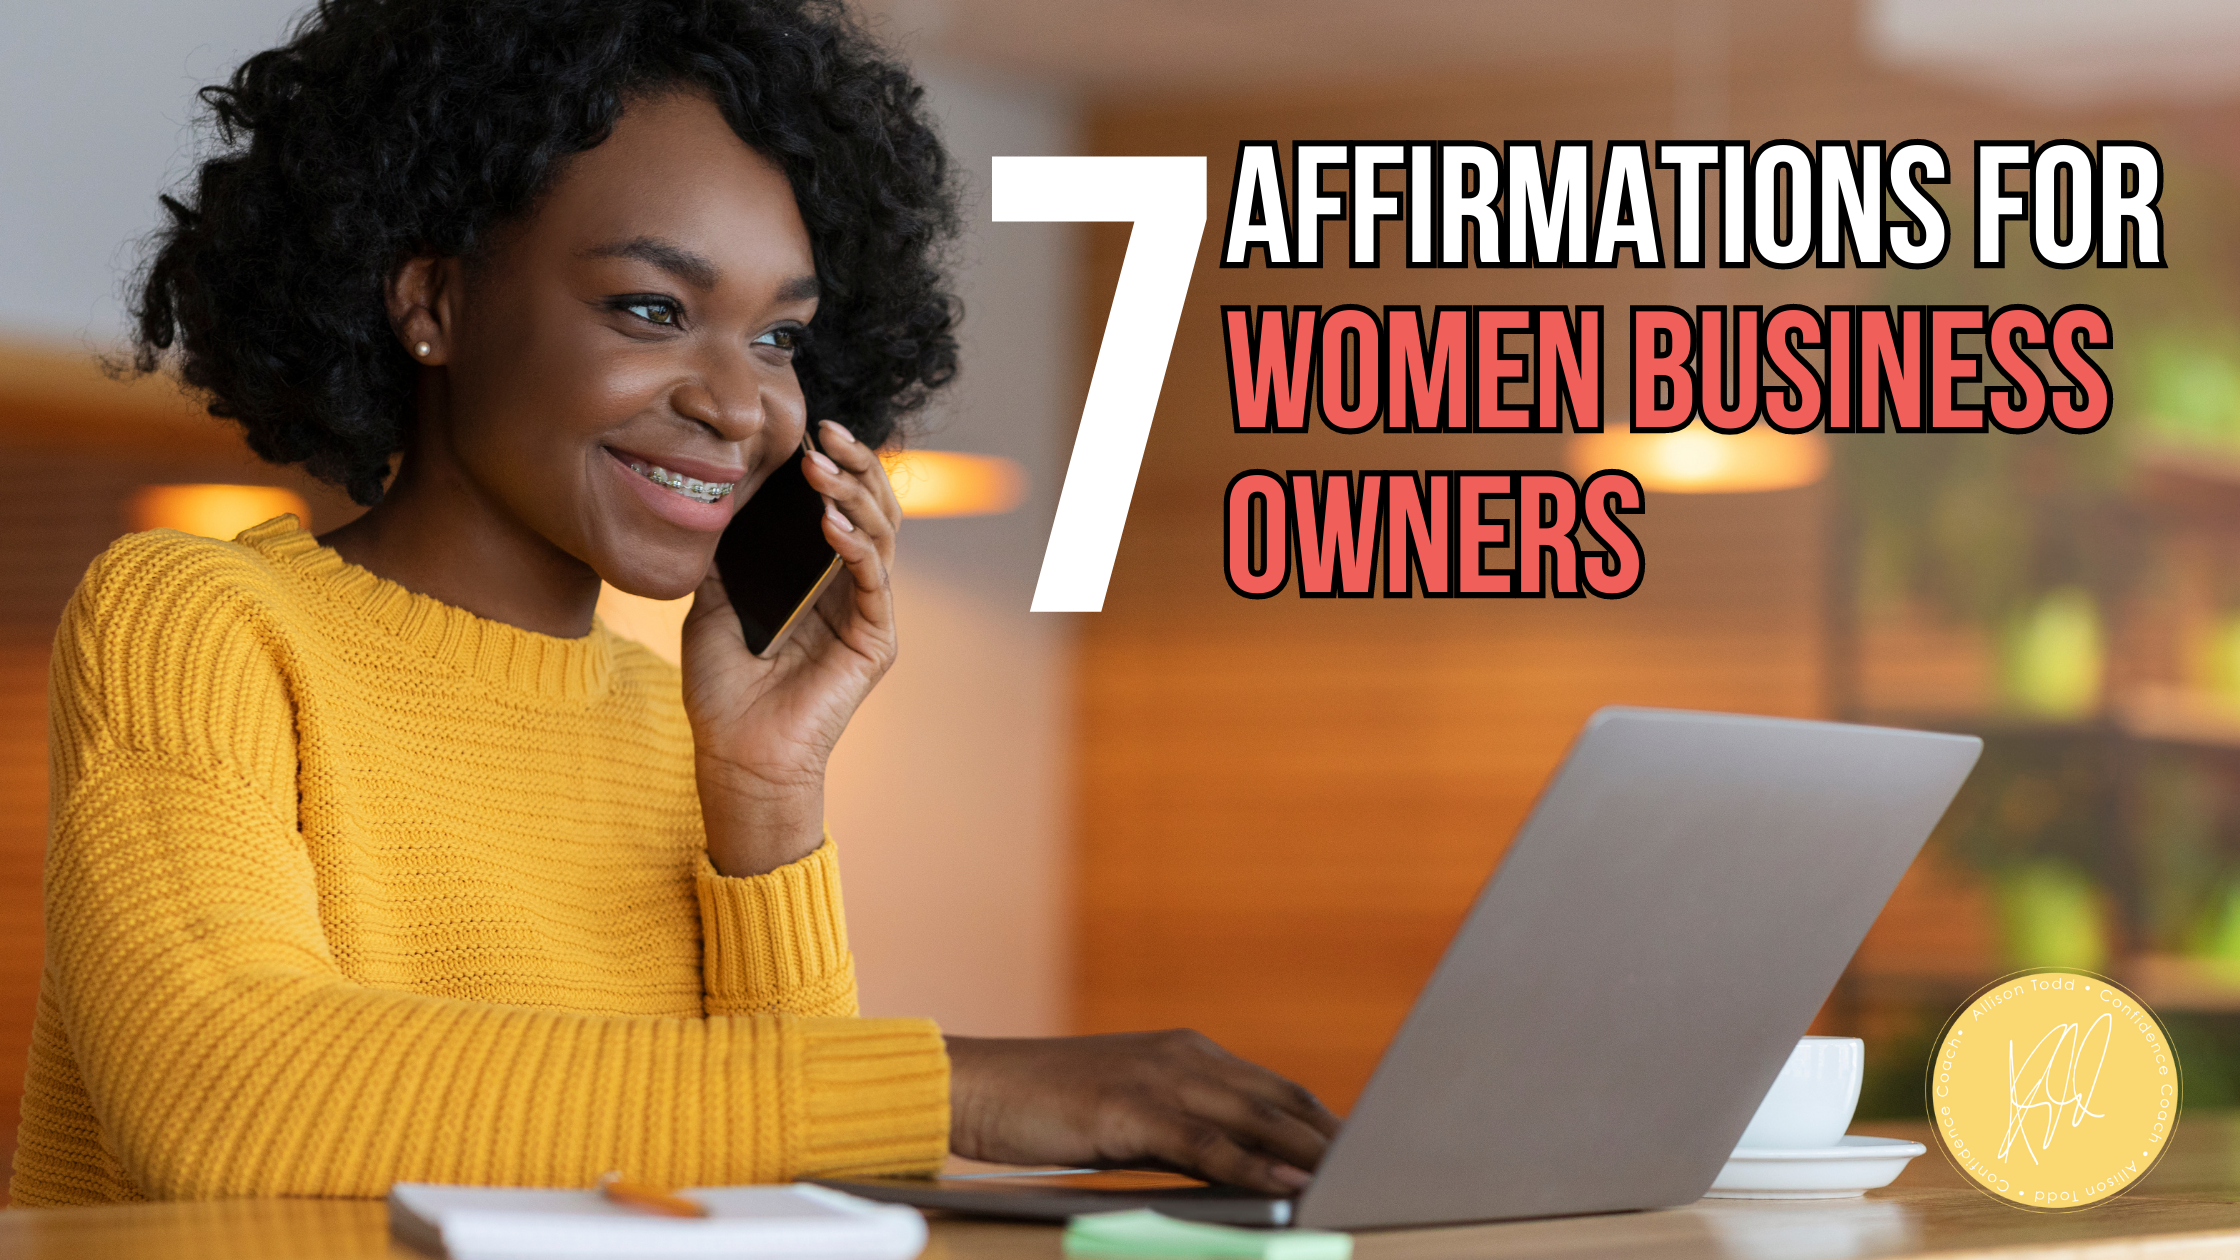 7 Affirmations for Women Business Owners